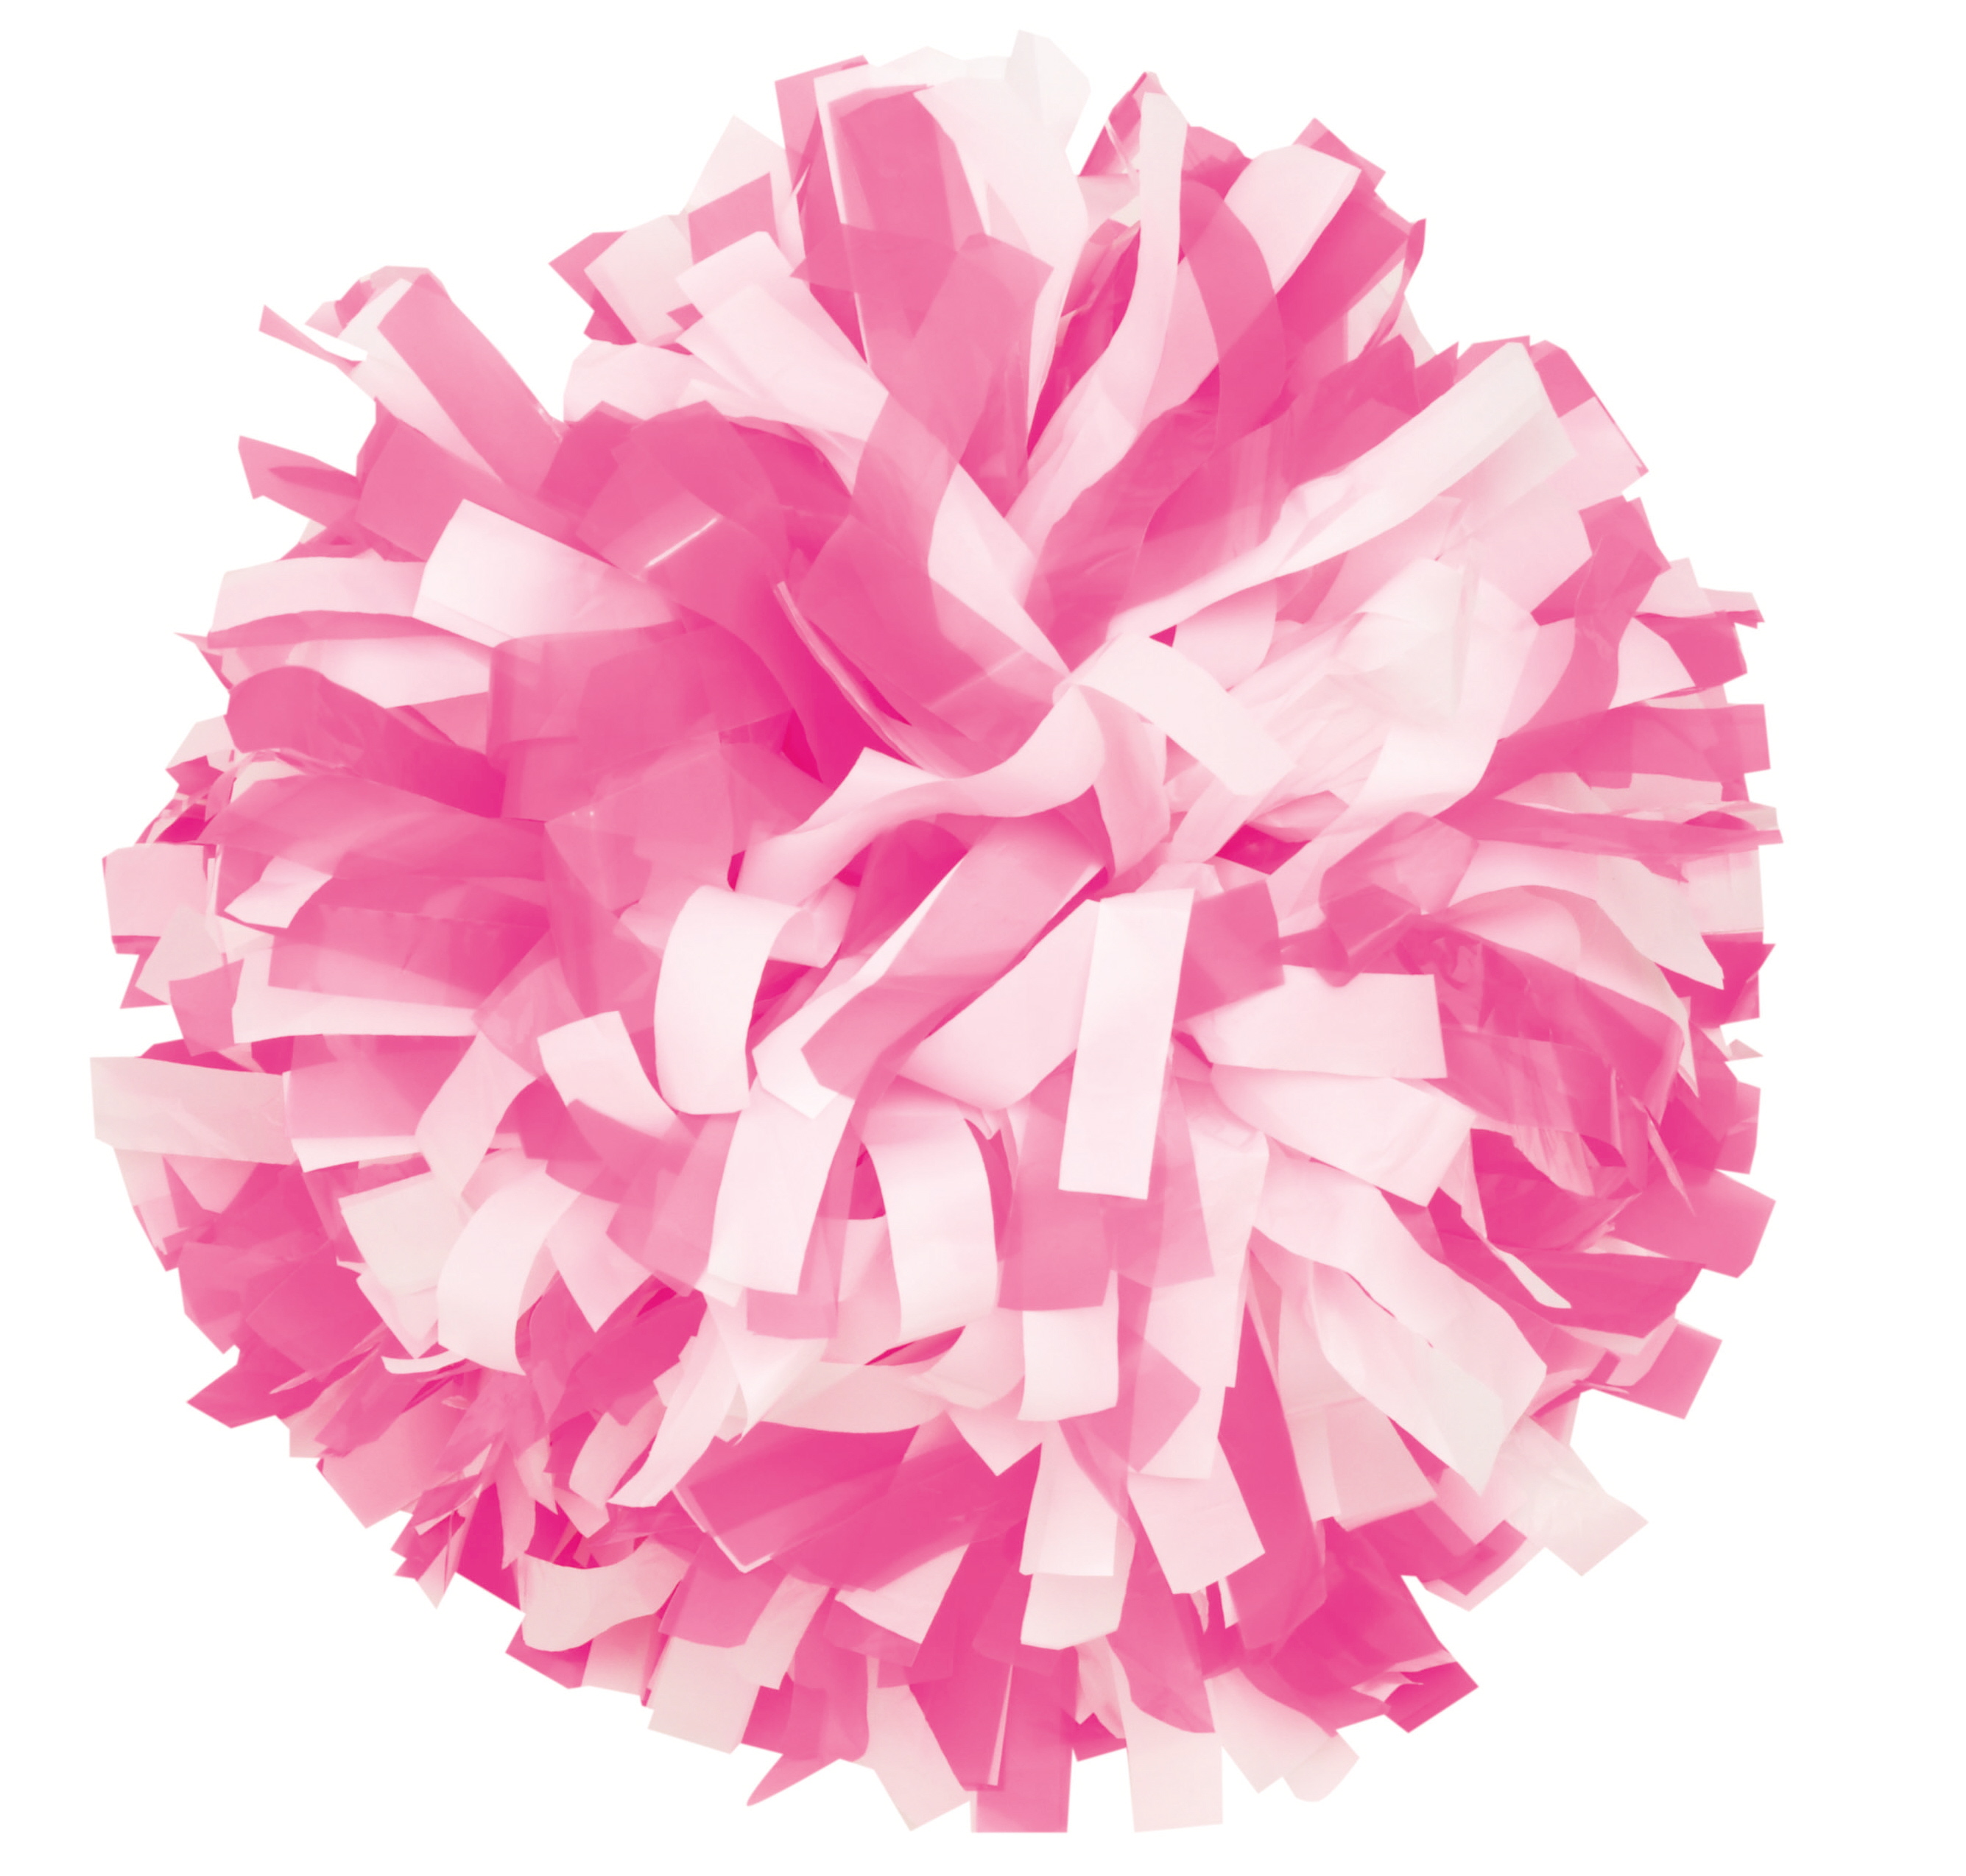 List 100+ Pictures Images Of Pom Poms Latest